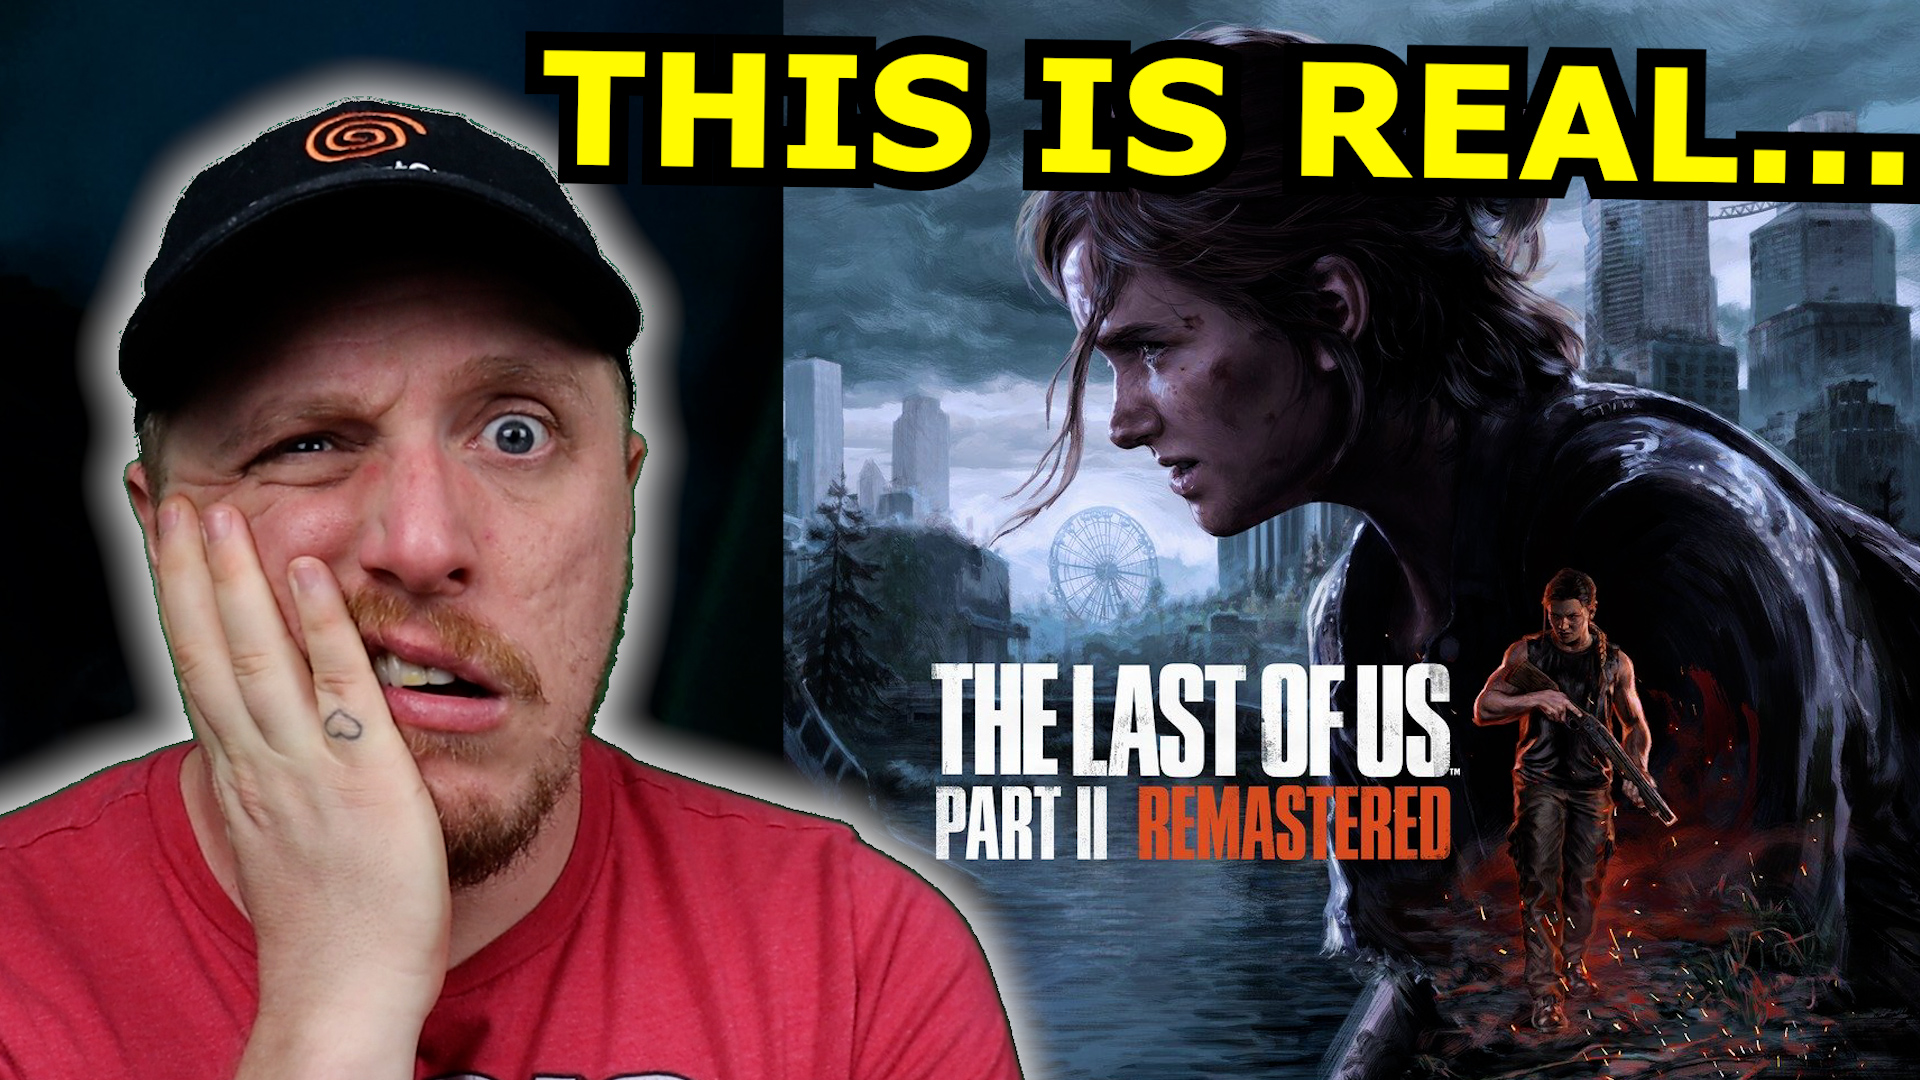 The Last Of Us Part II Remastered Coming To PS5